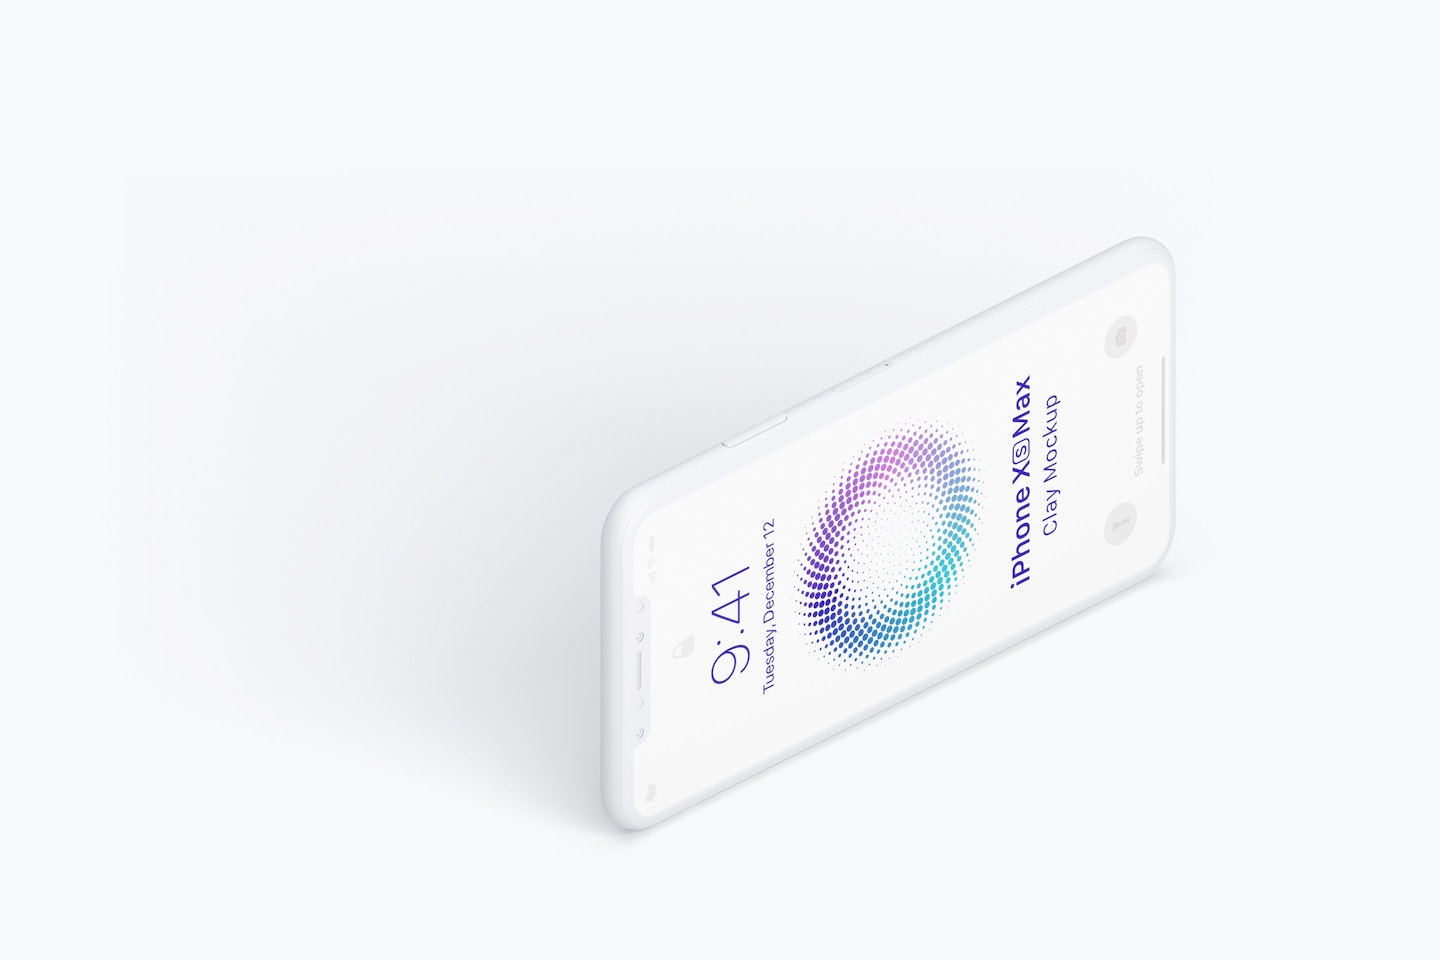 Isometric Clay iPhone XS Max Mockup, Left View 03